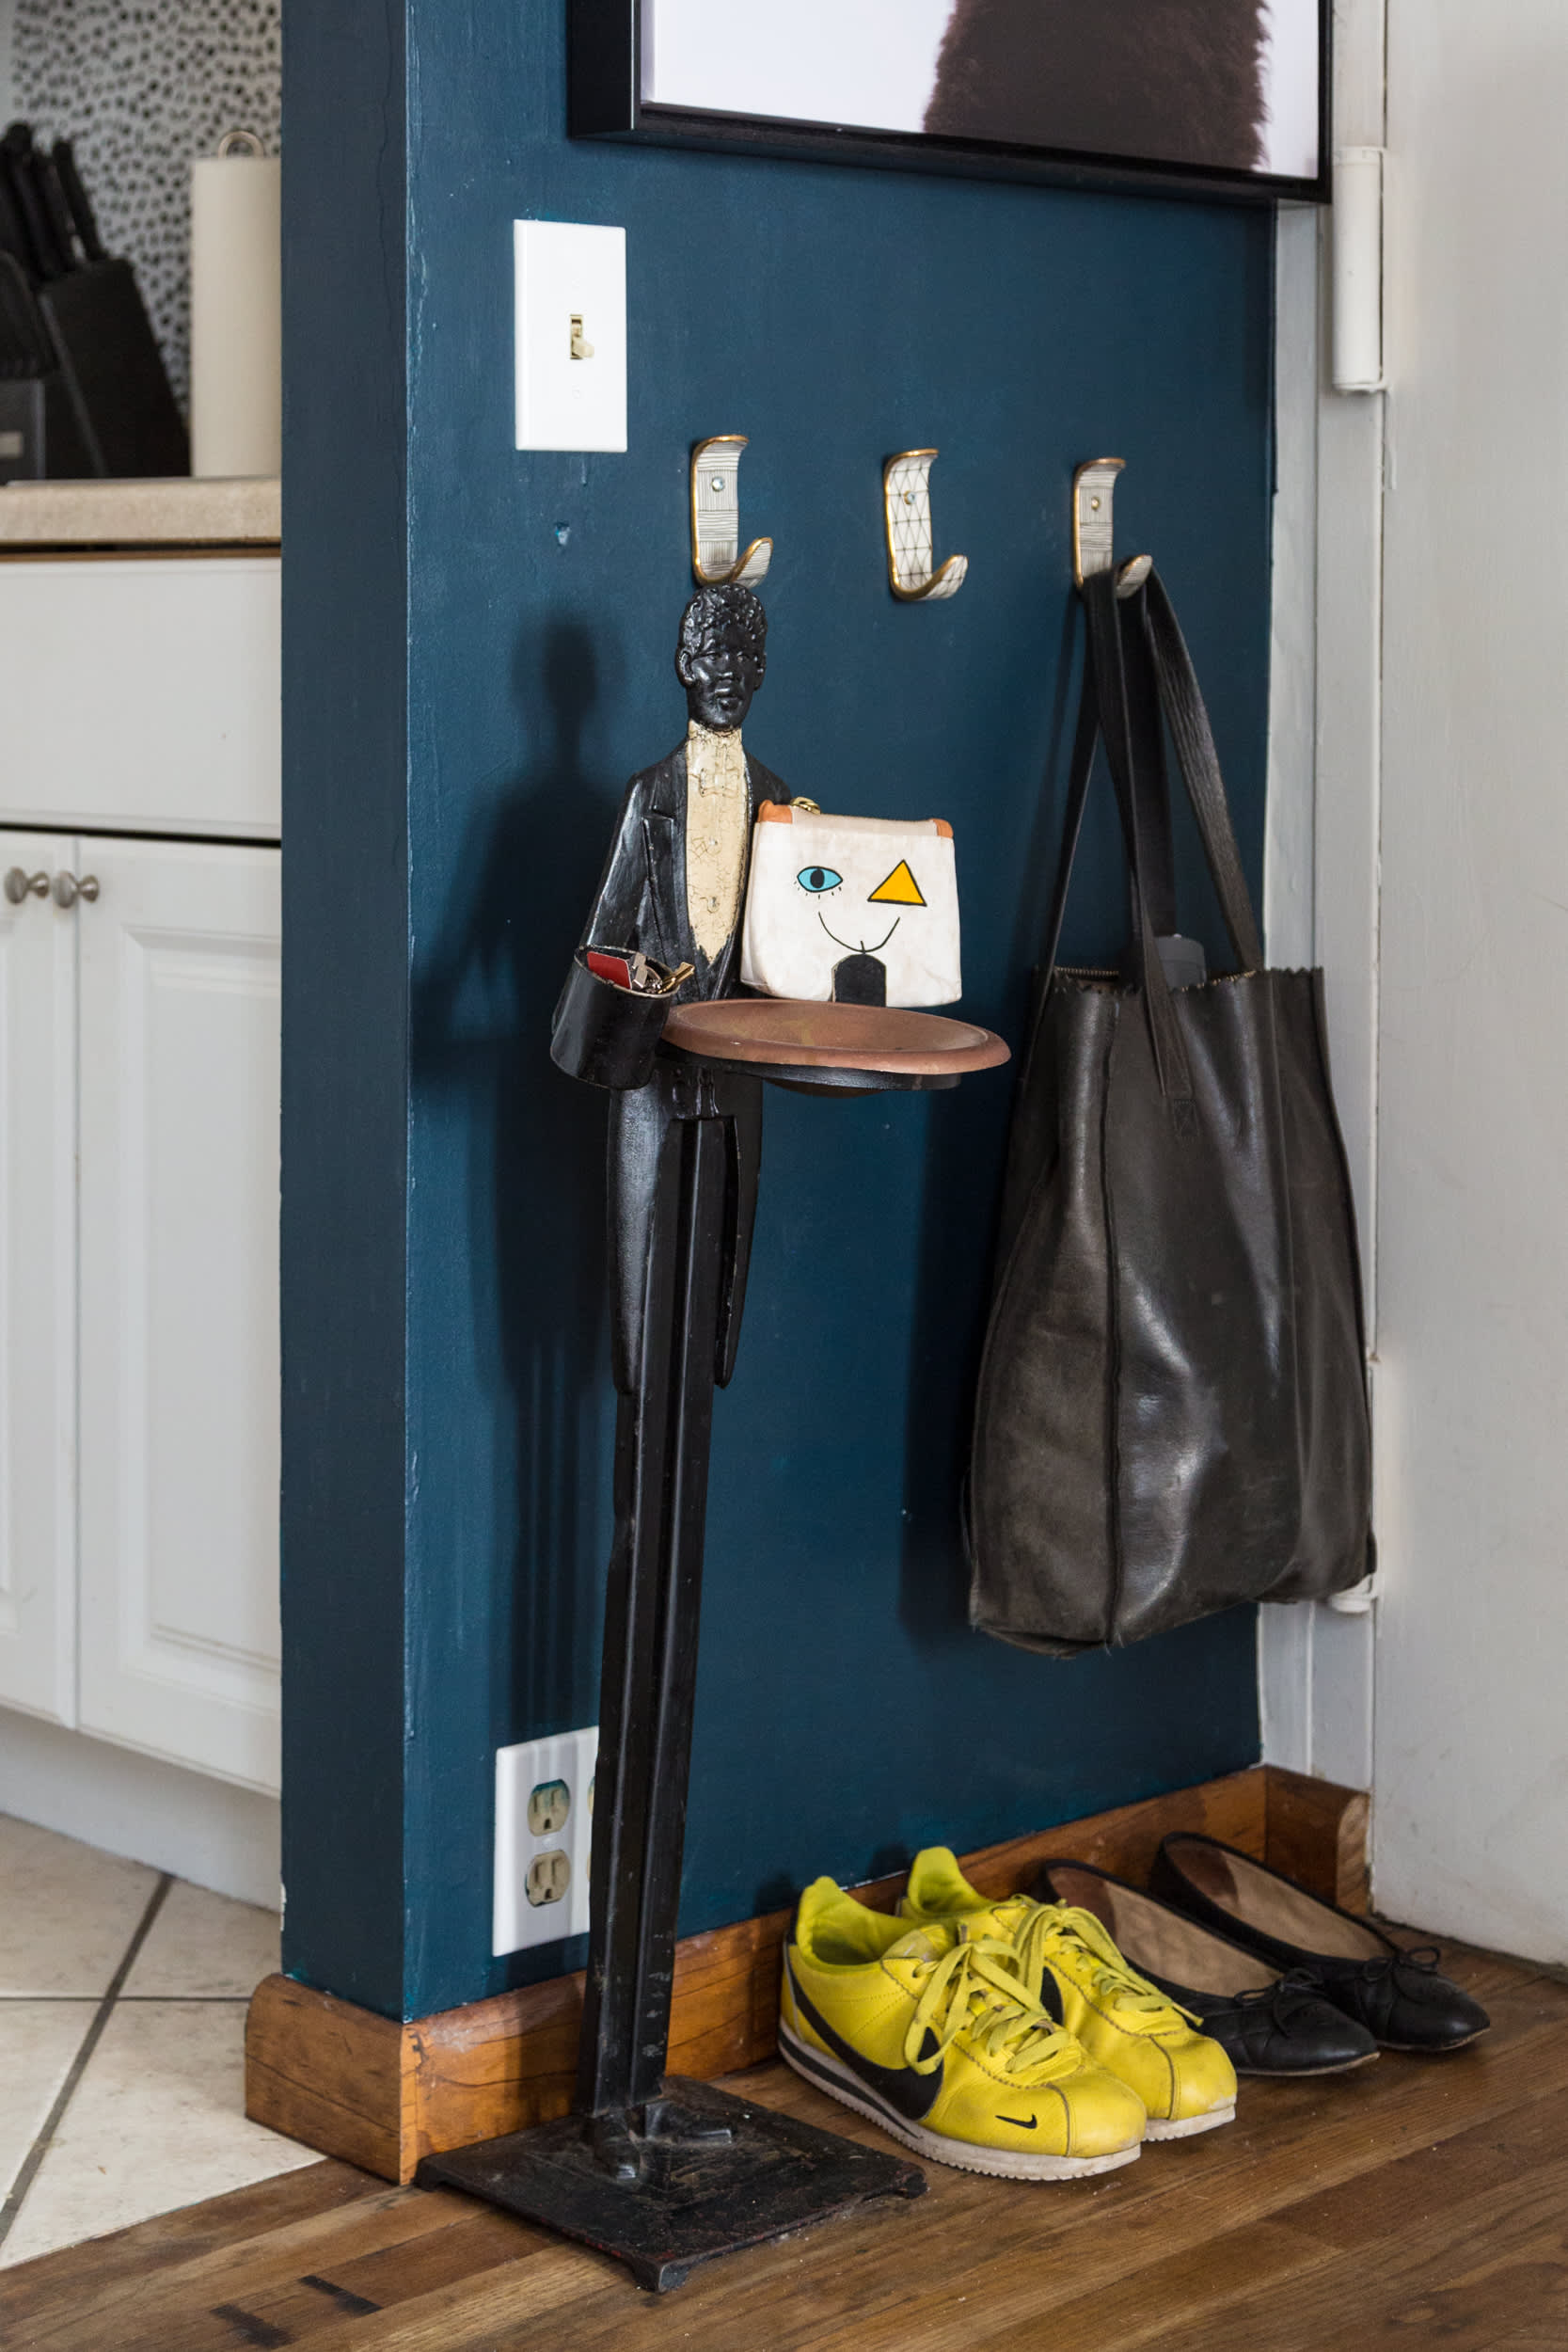 23 Creative Solutions for Storing Items in Limited Space